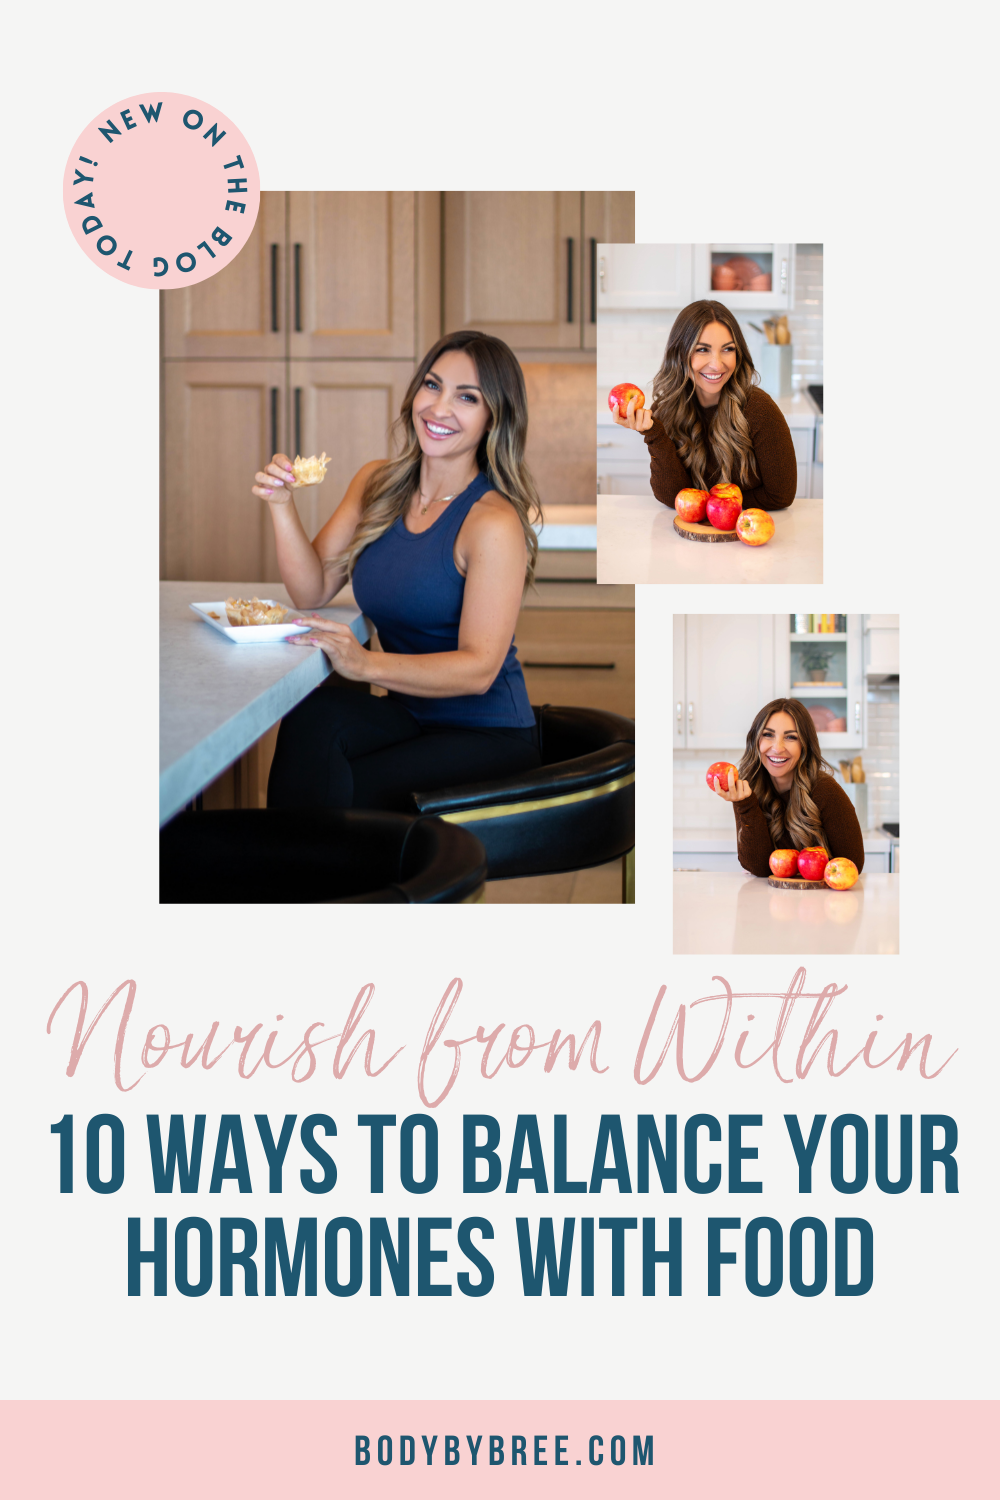 NOURISH FORM WITHIN: 10 WAYS TO BALANCE YOUR HORMONES WITH FOOD